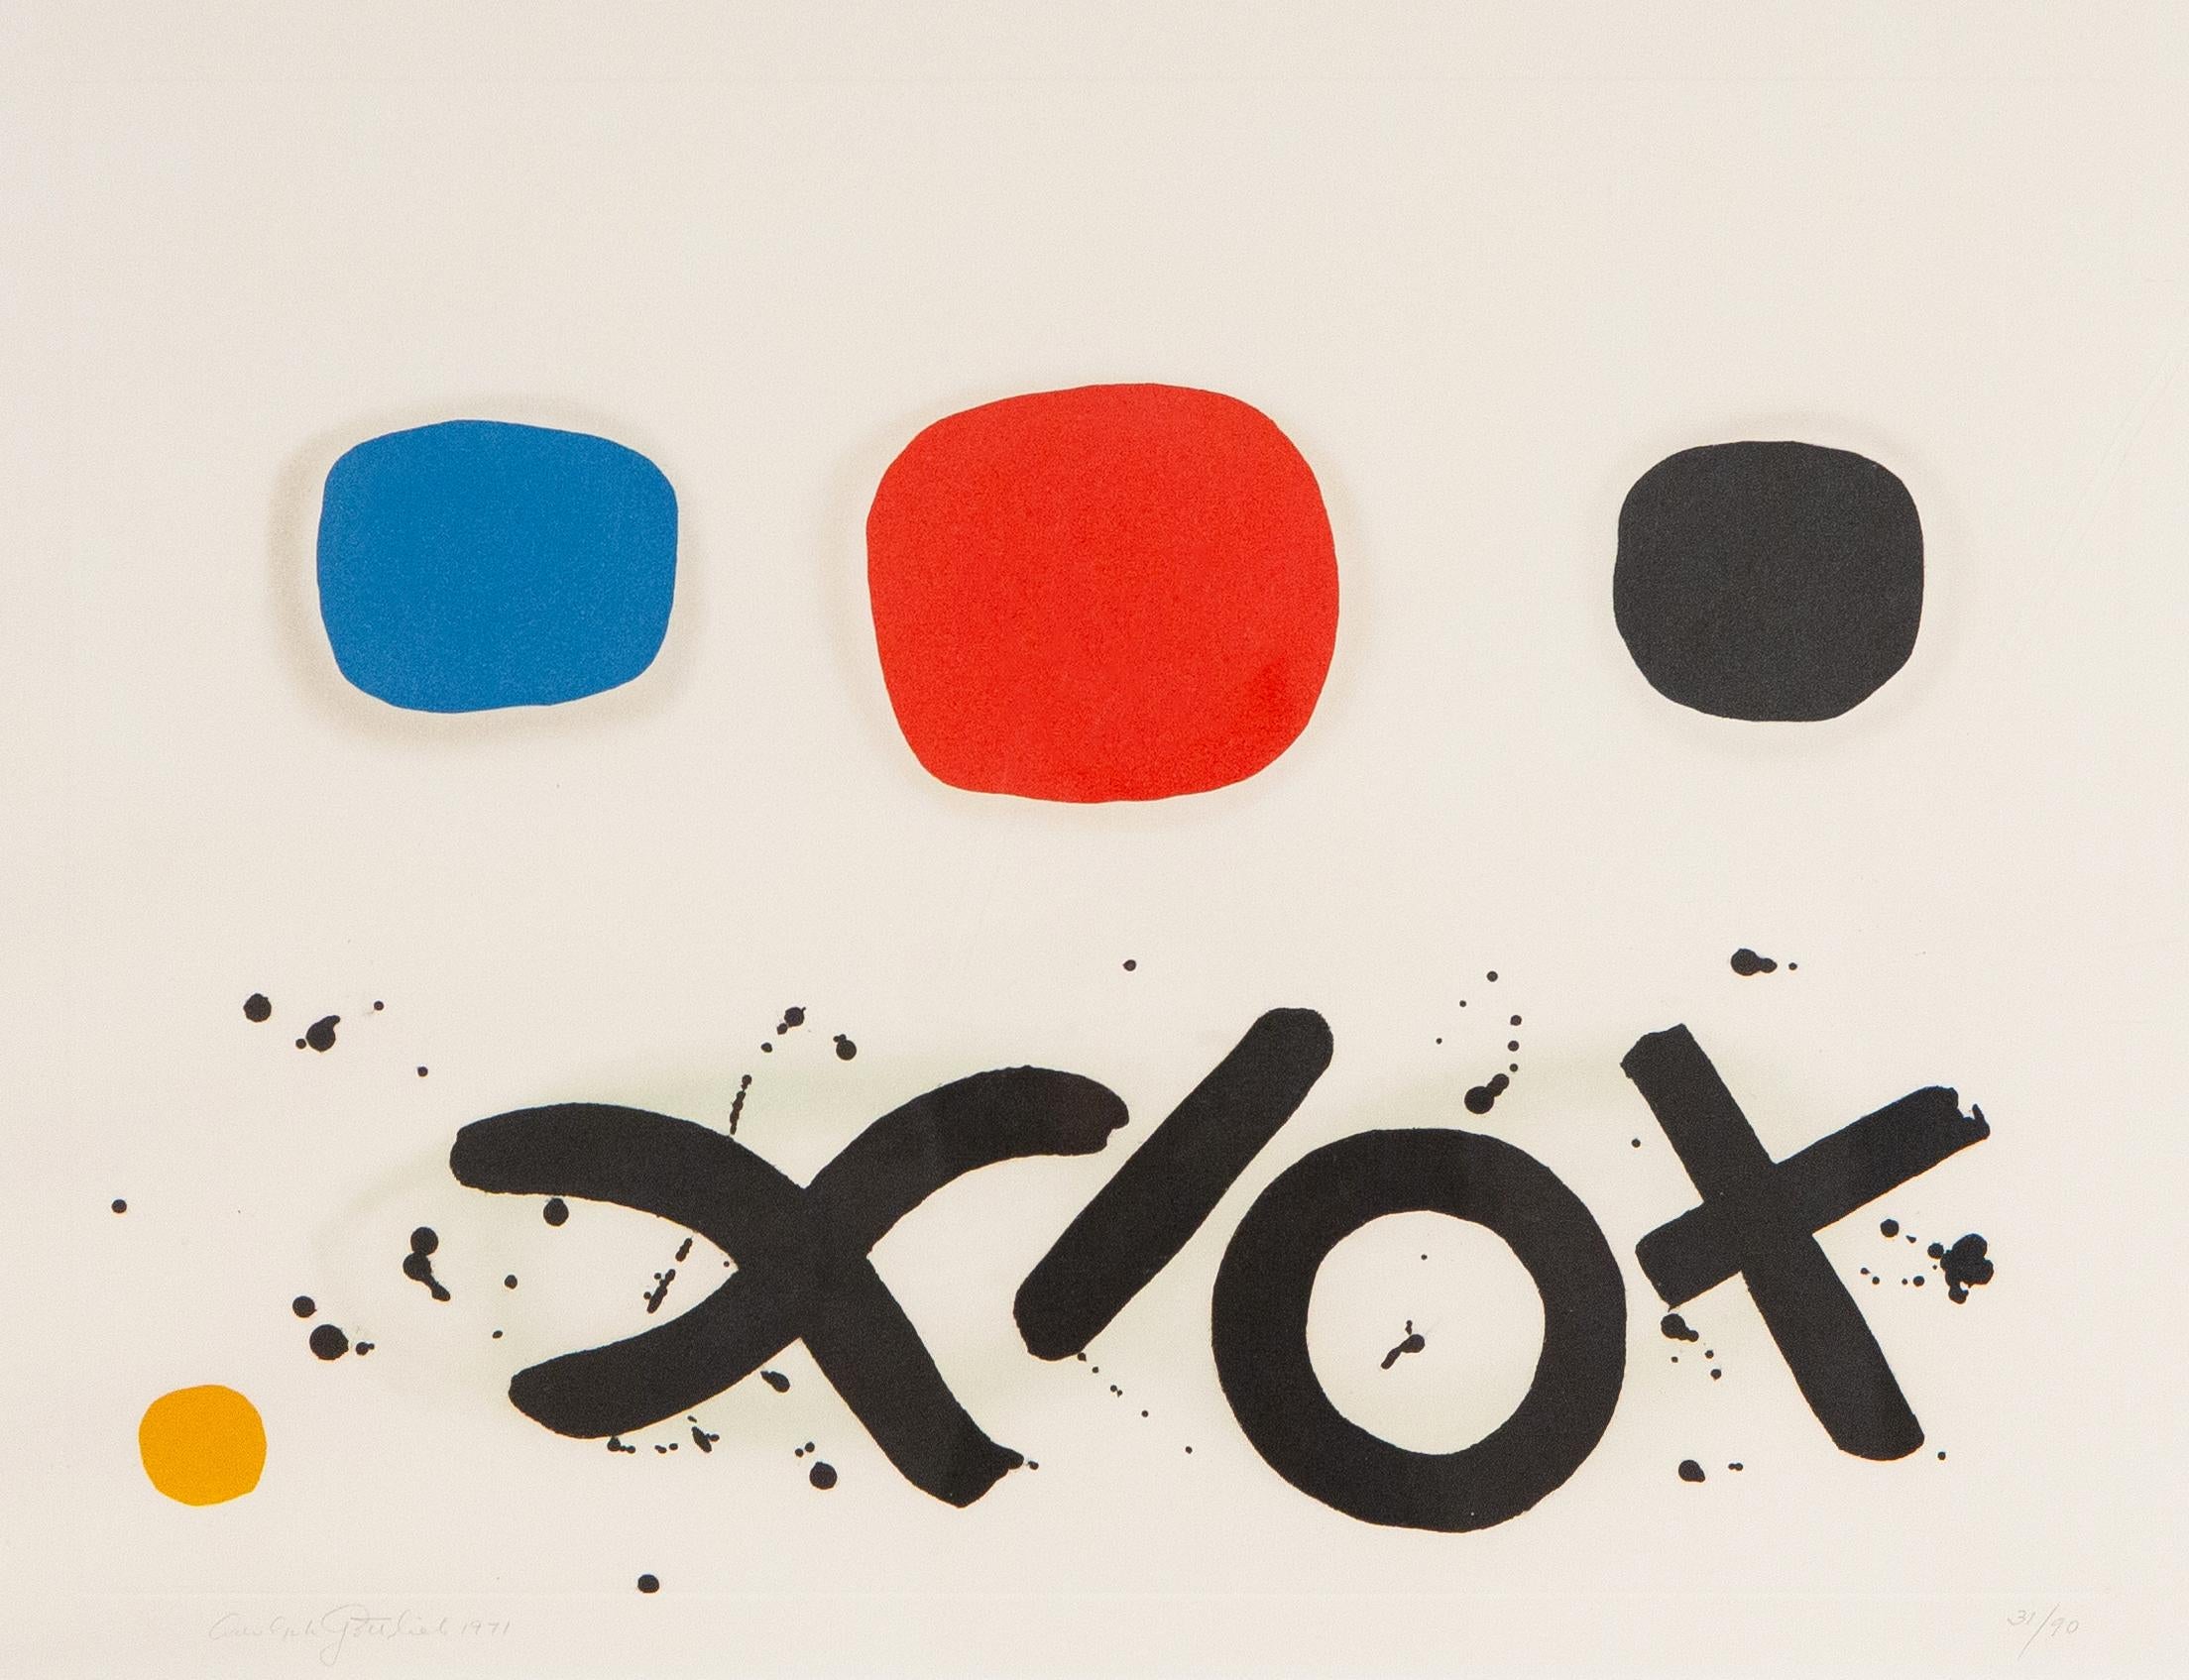 Imaginary Landscape I - Abstract Print by Adolph Gottlieb